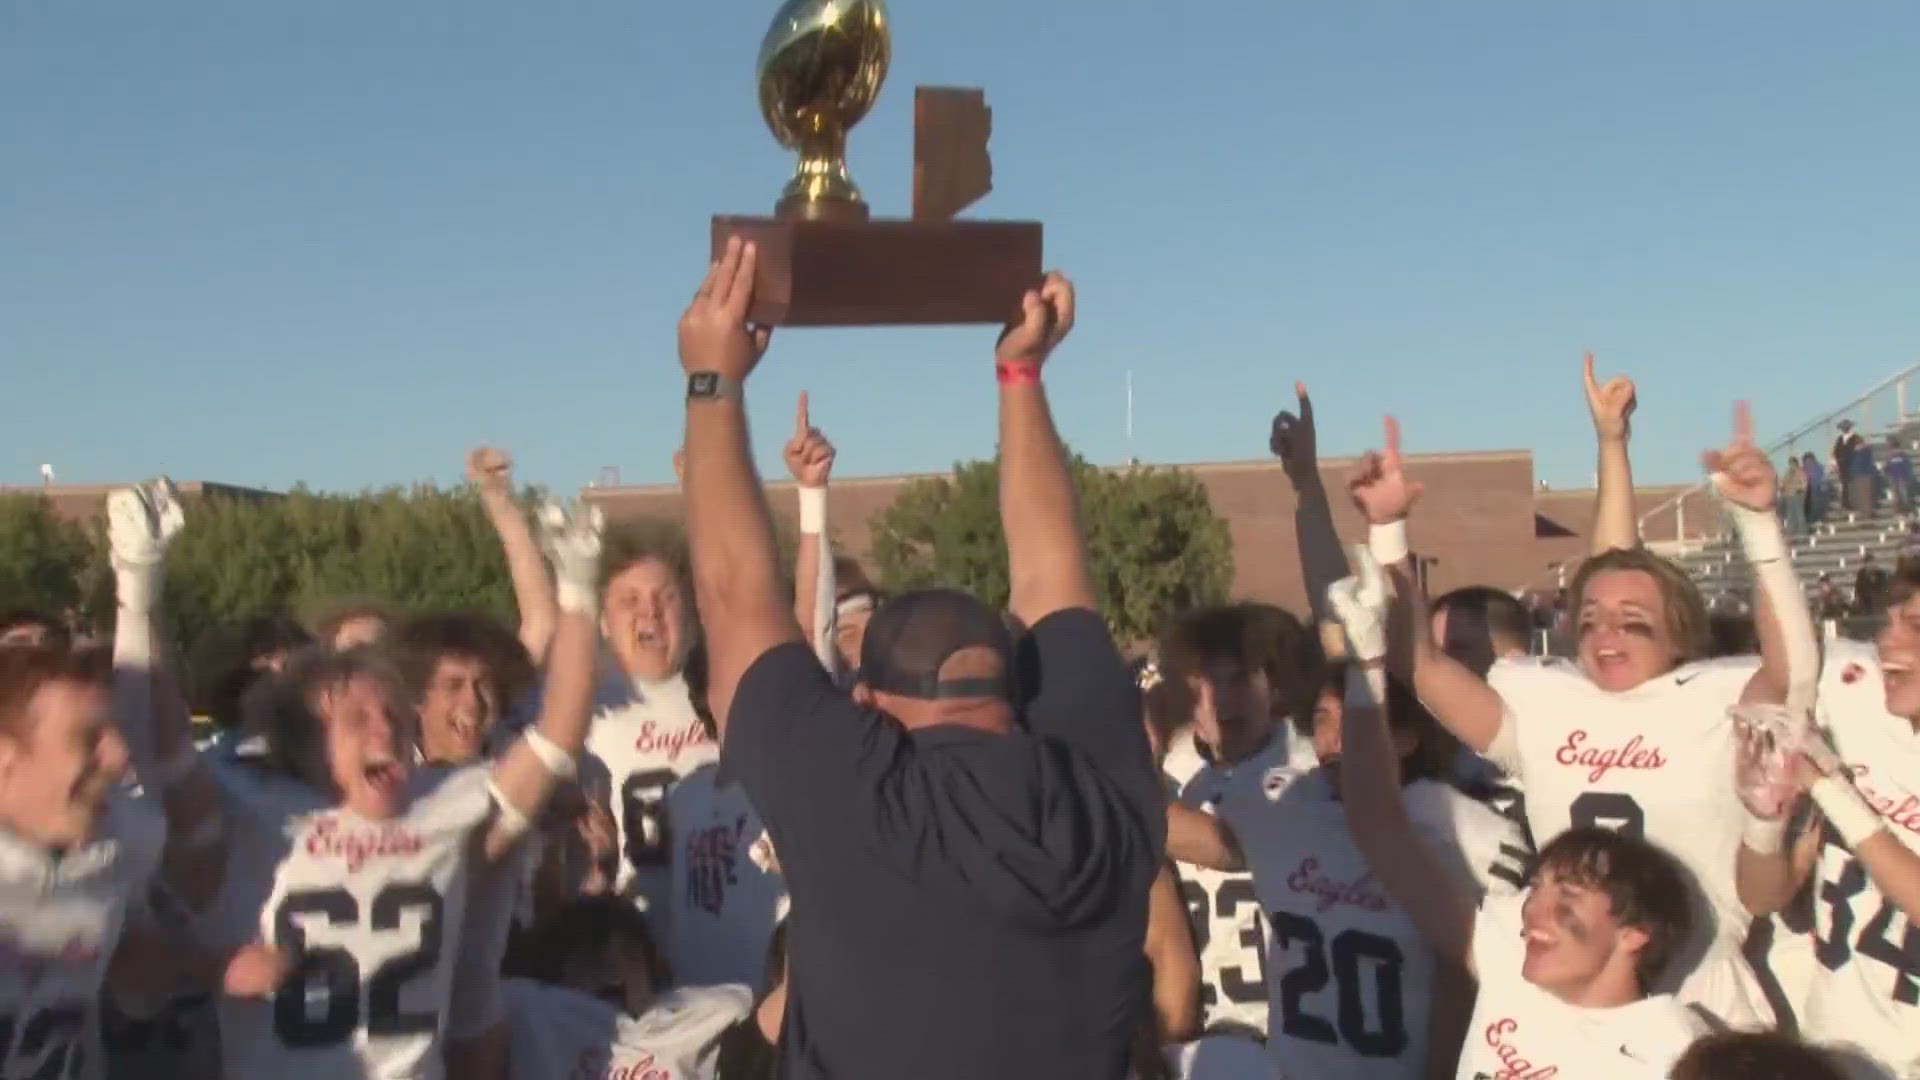 The Scottsdale Christian Eagles beat Pima to win their first state title since 1983! Here are just some of the highlights from the title game